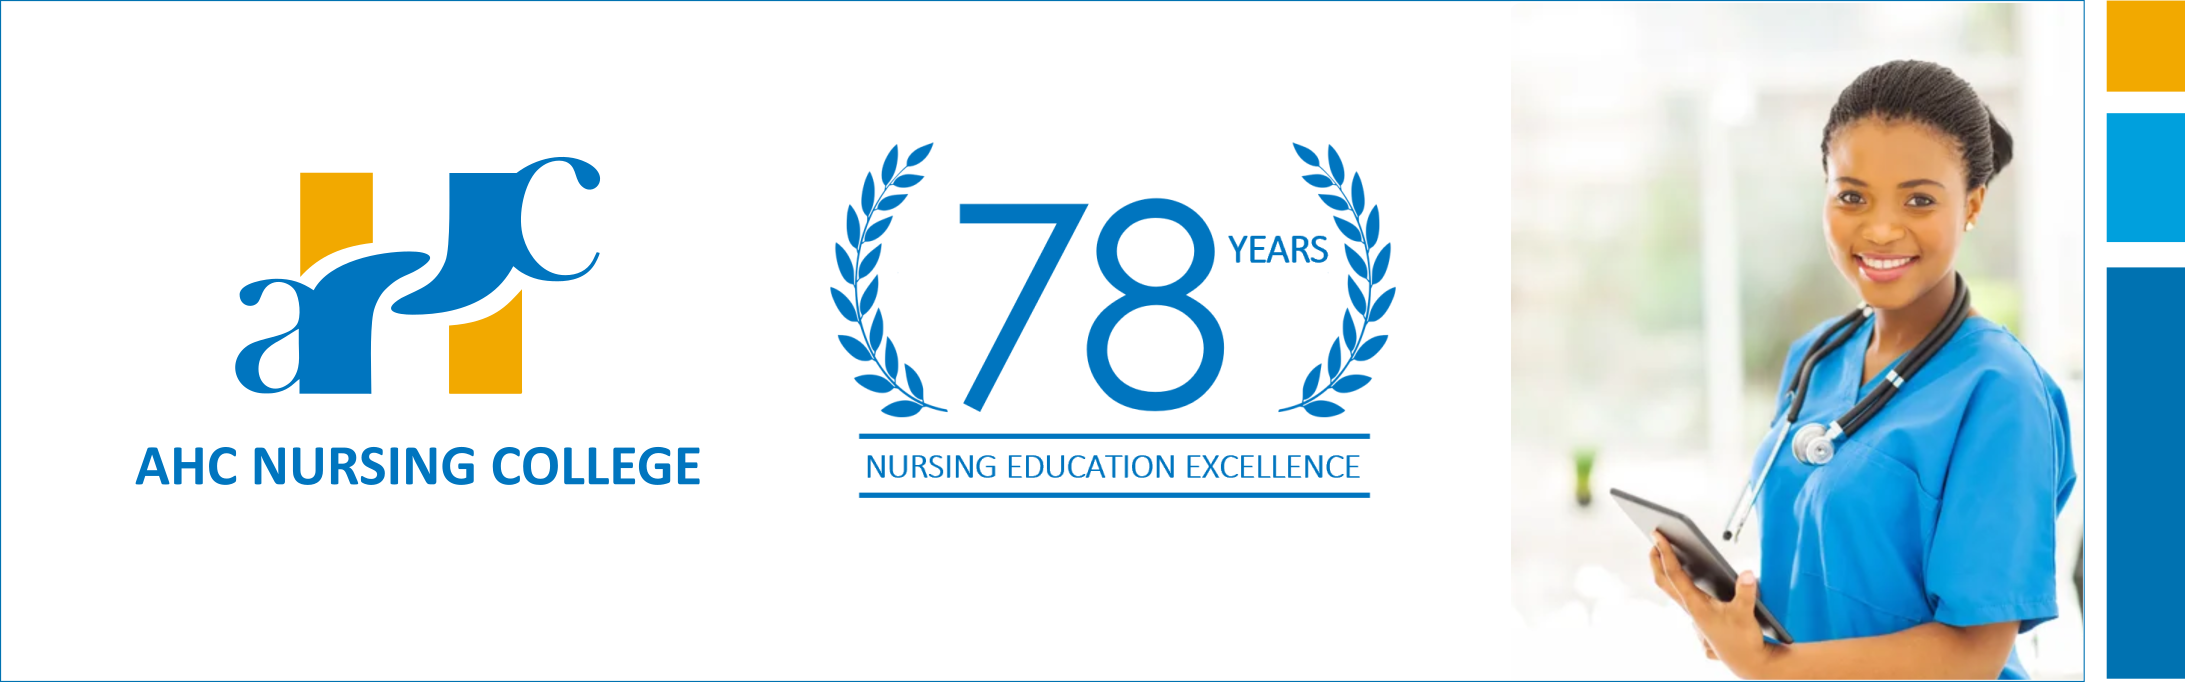 AHC Nursing College - 78 Years of Nursing Education Excellence